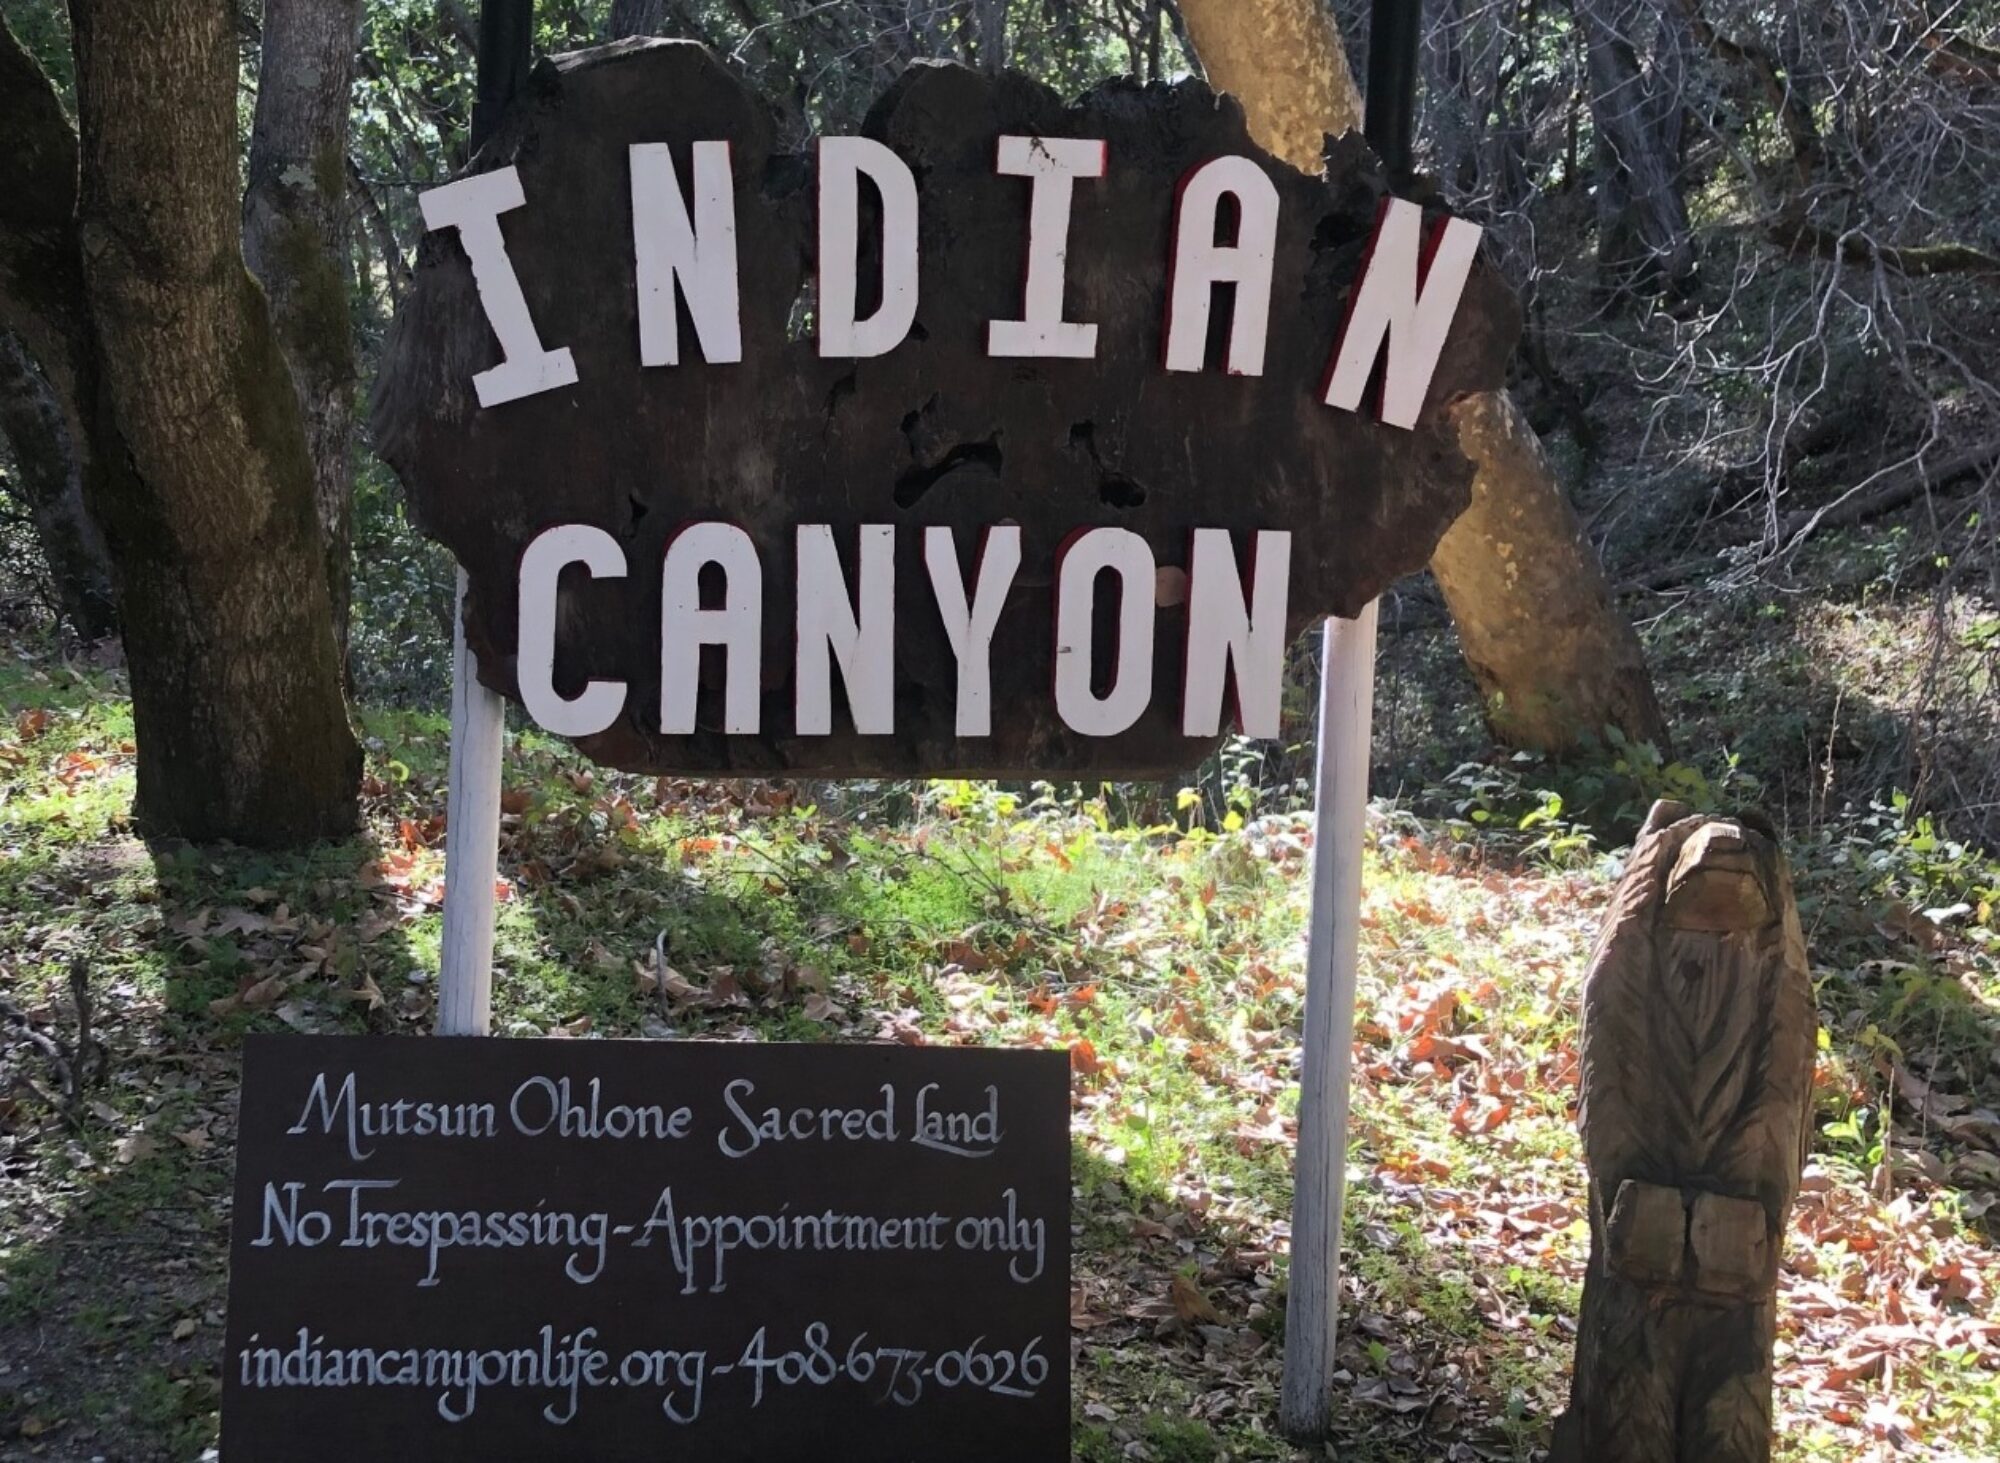 Support Indian Canyon Nation